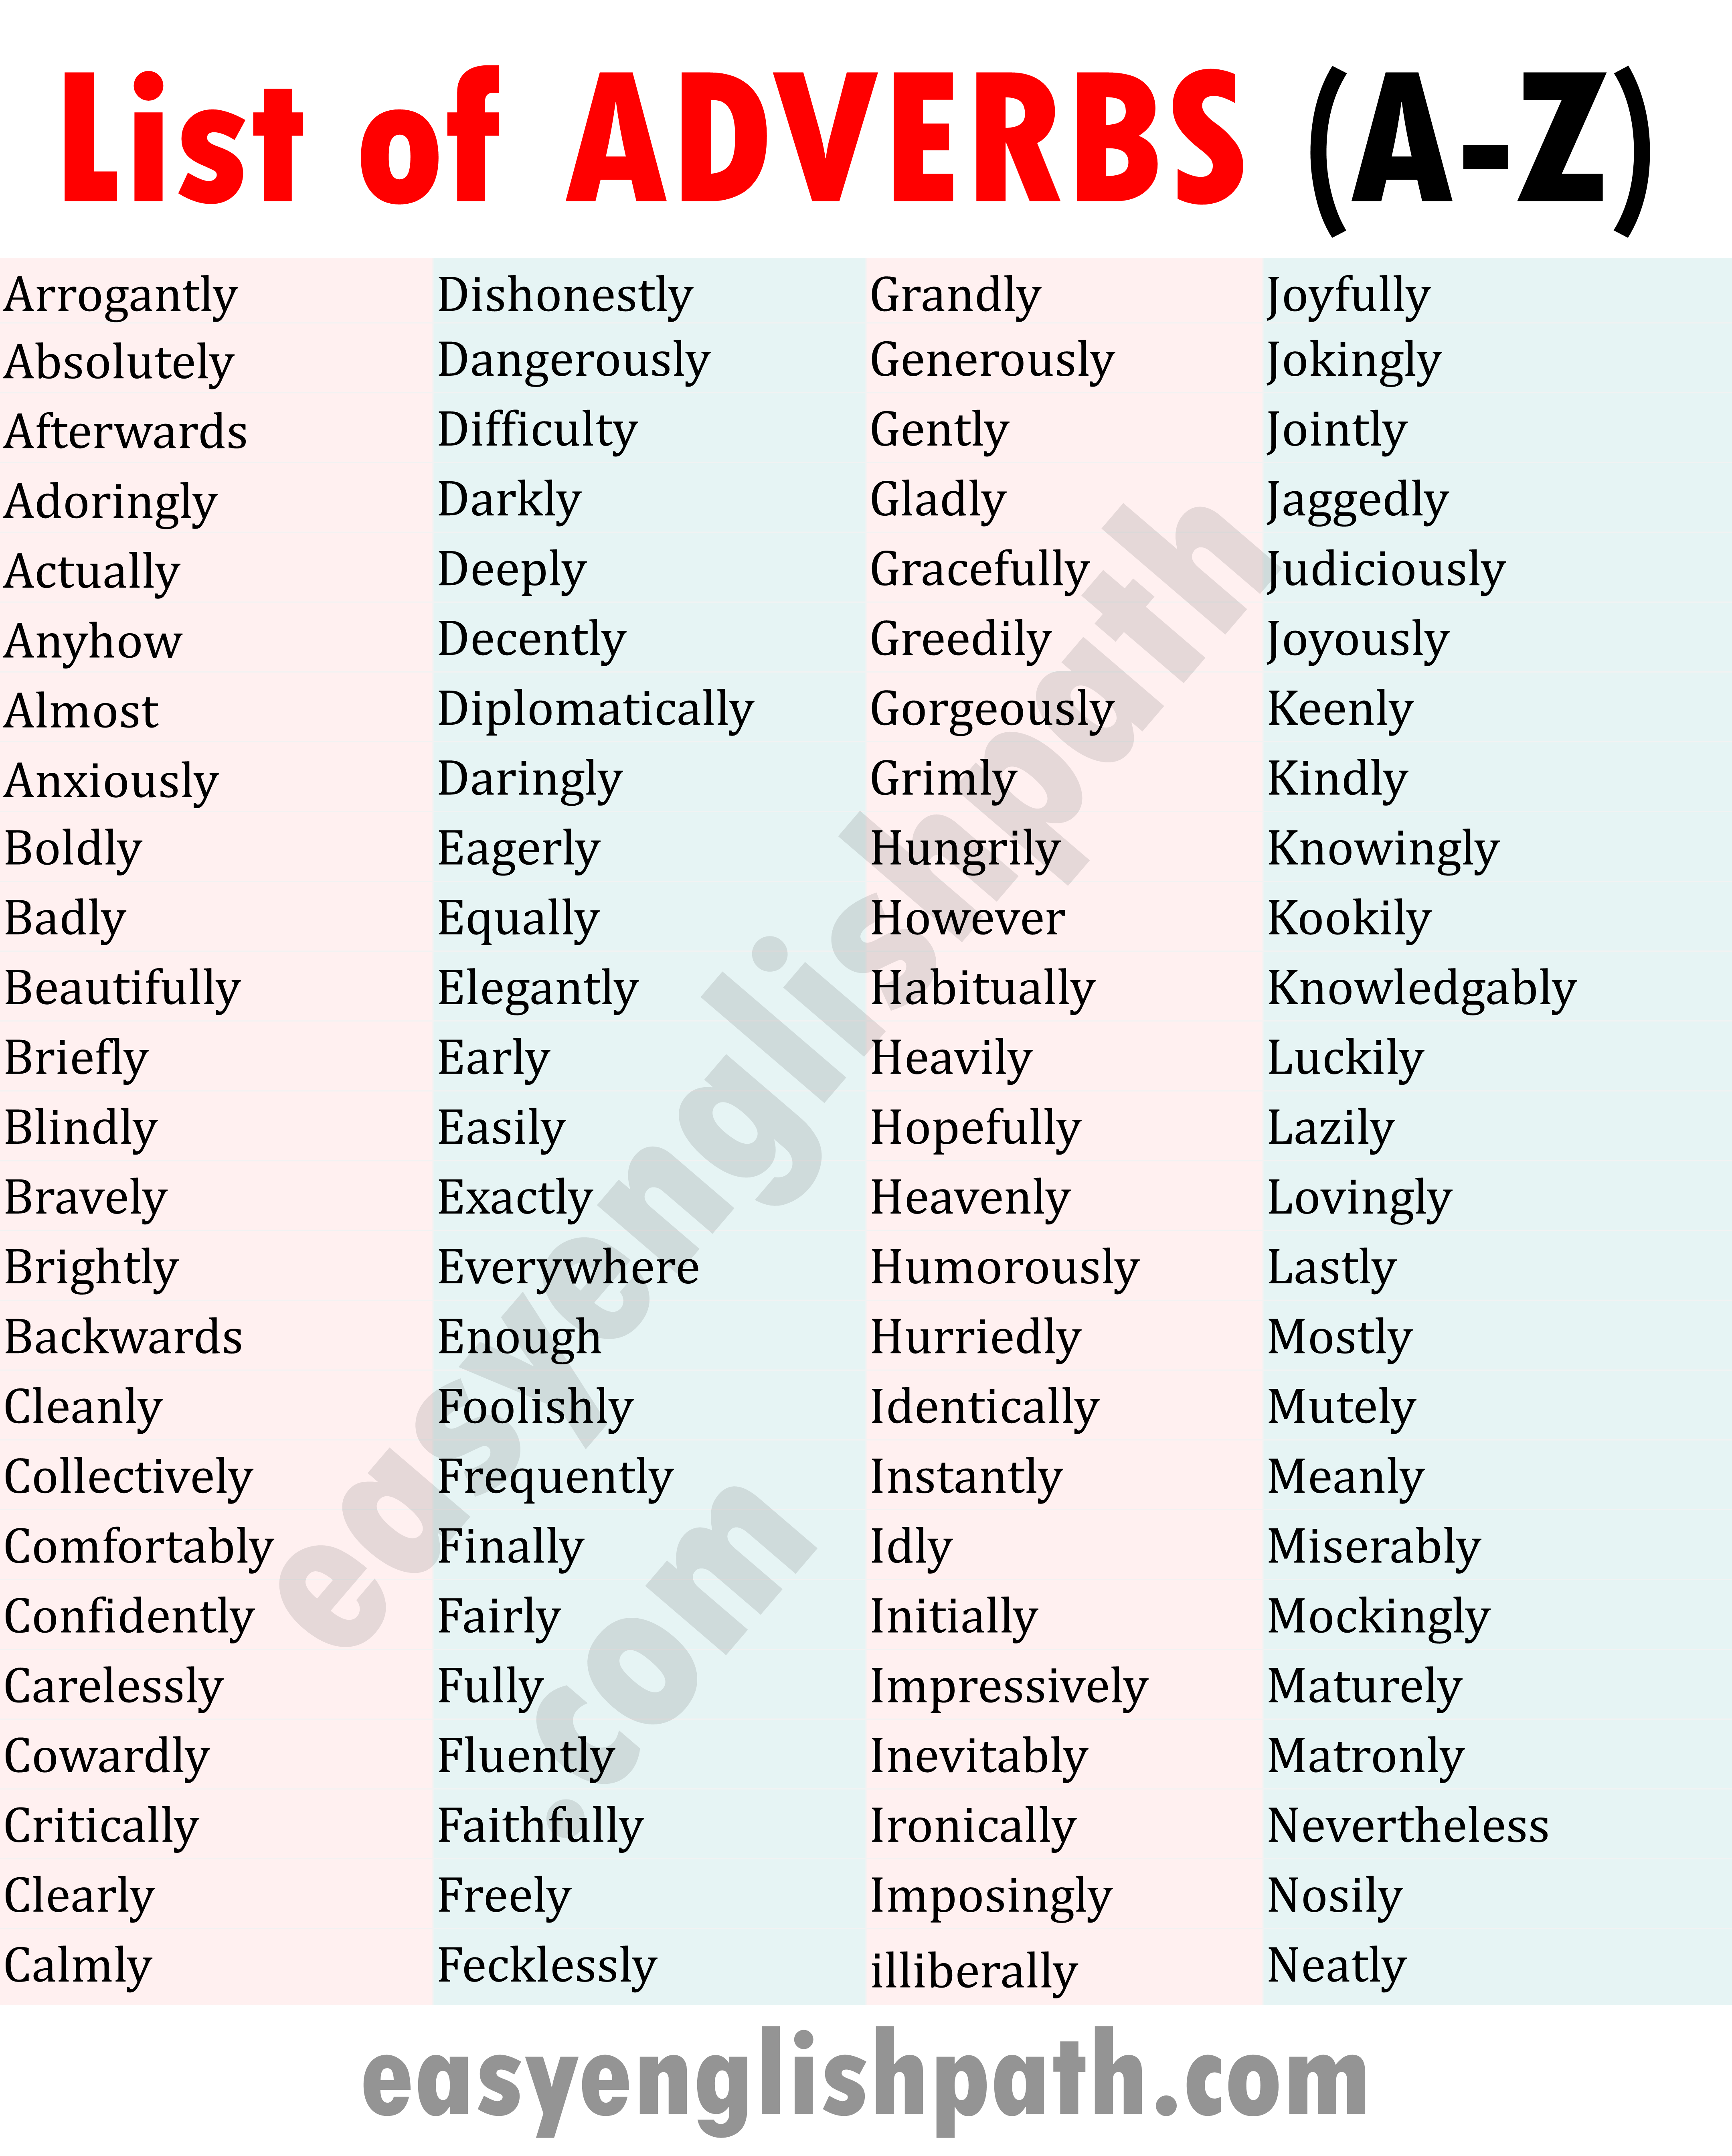 Comprehensive List of Adverbs from A to Z